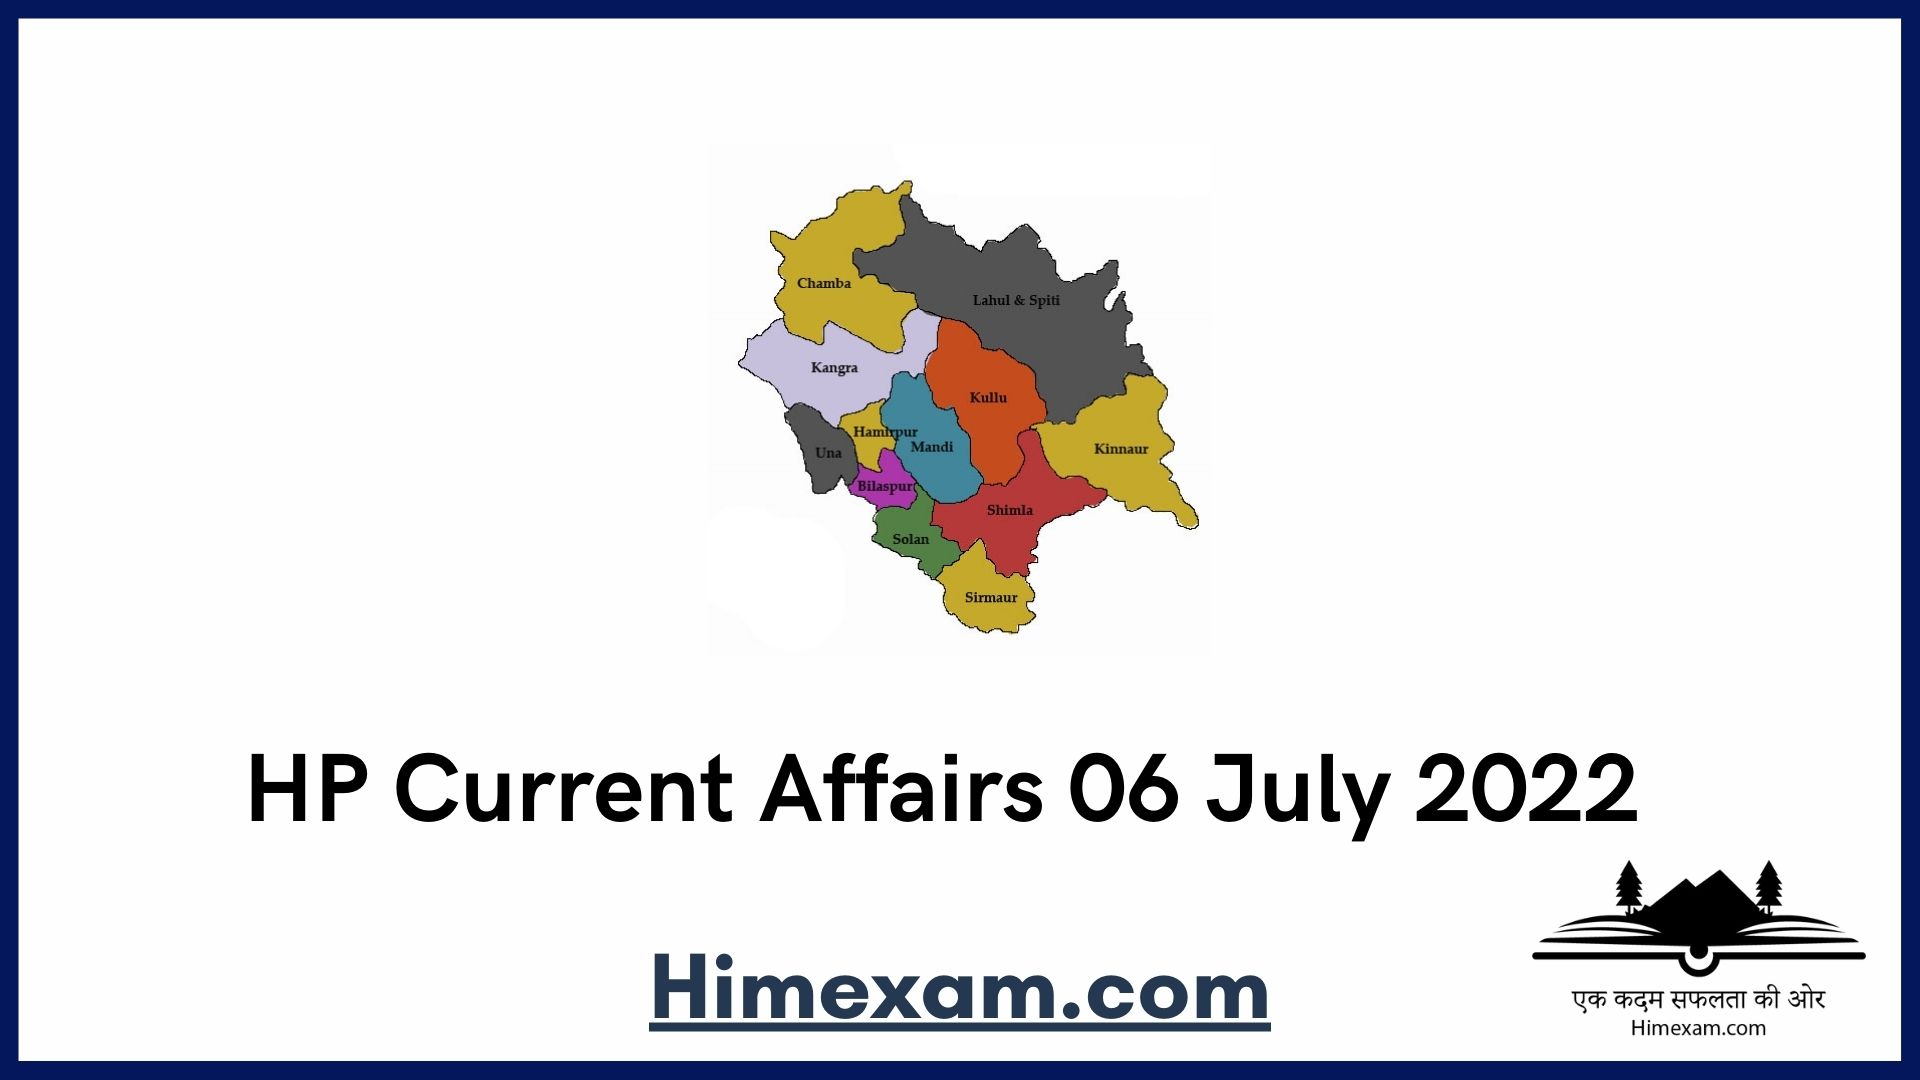 HP Current Affairs 06 July 2022